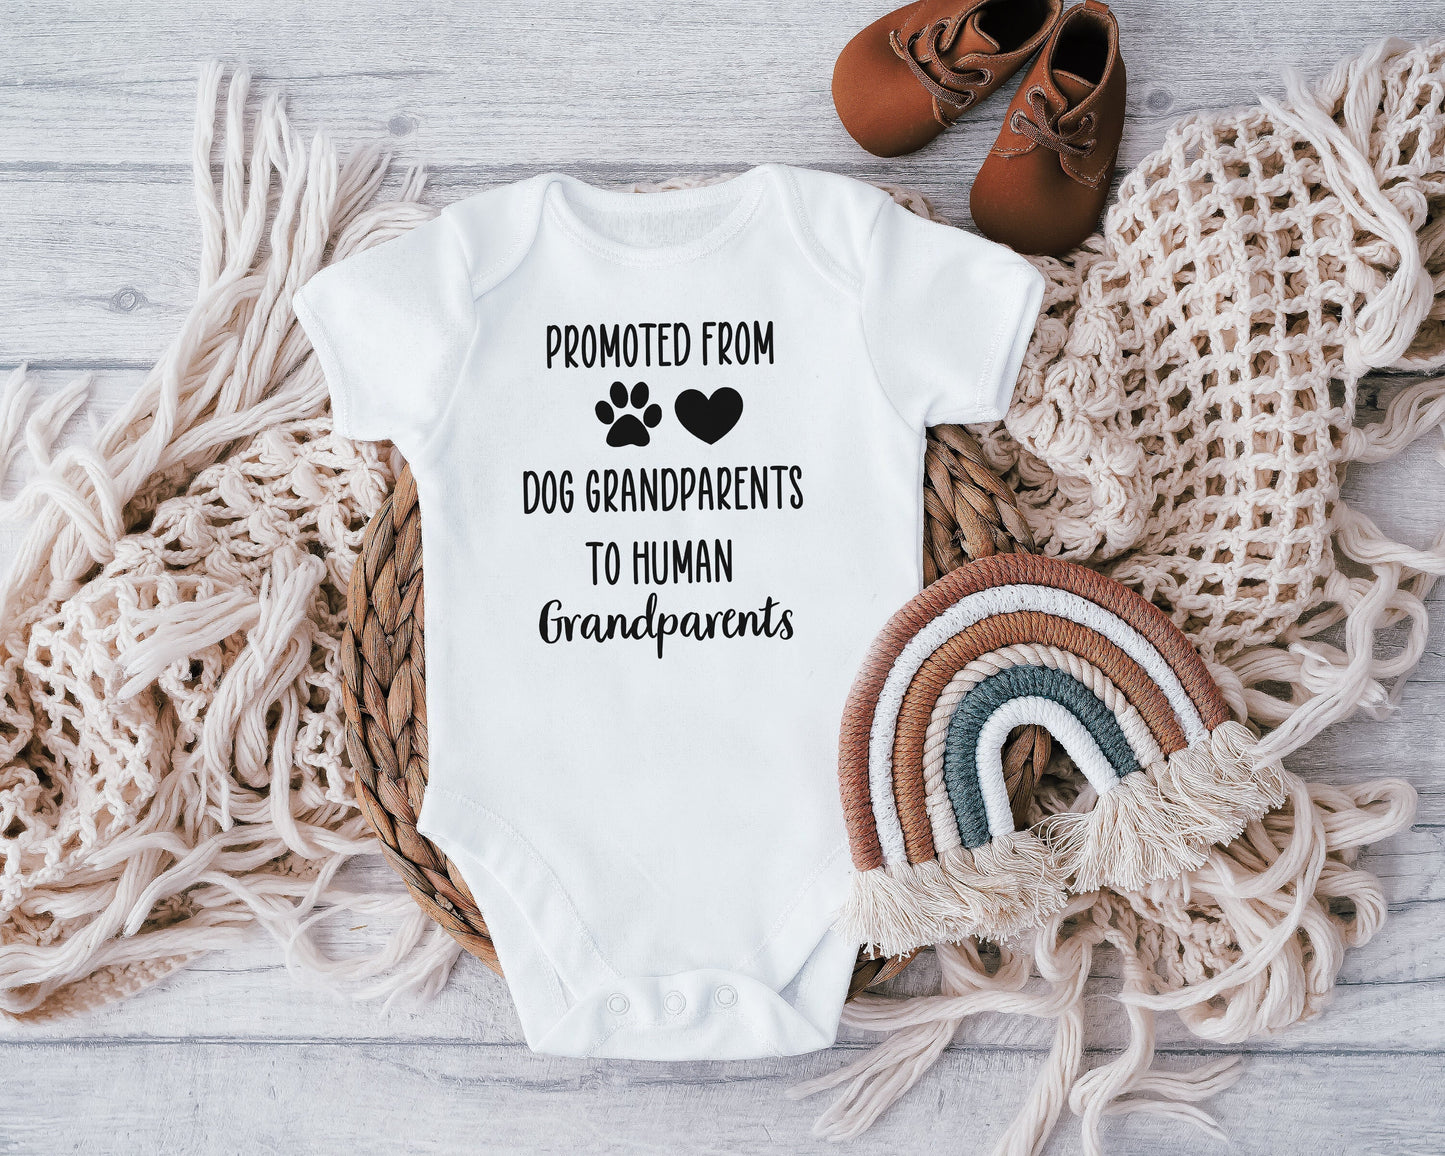 Promoted From Dog Grandparents to Human Grandparents Baby Vest, Baby Grow